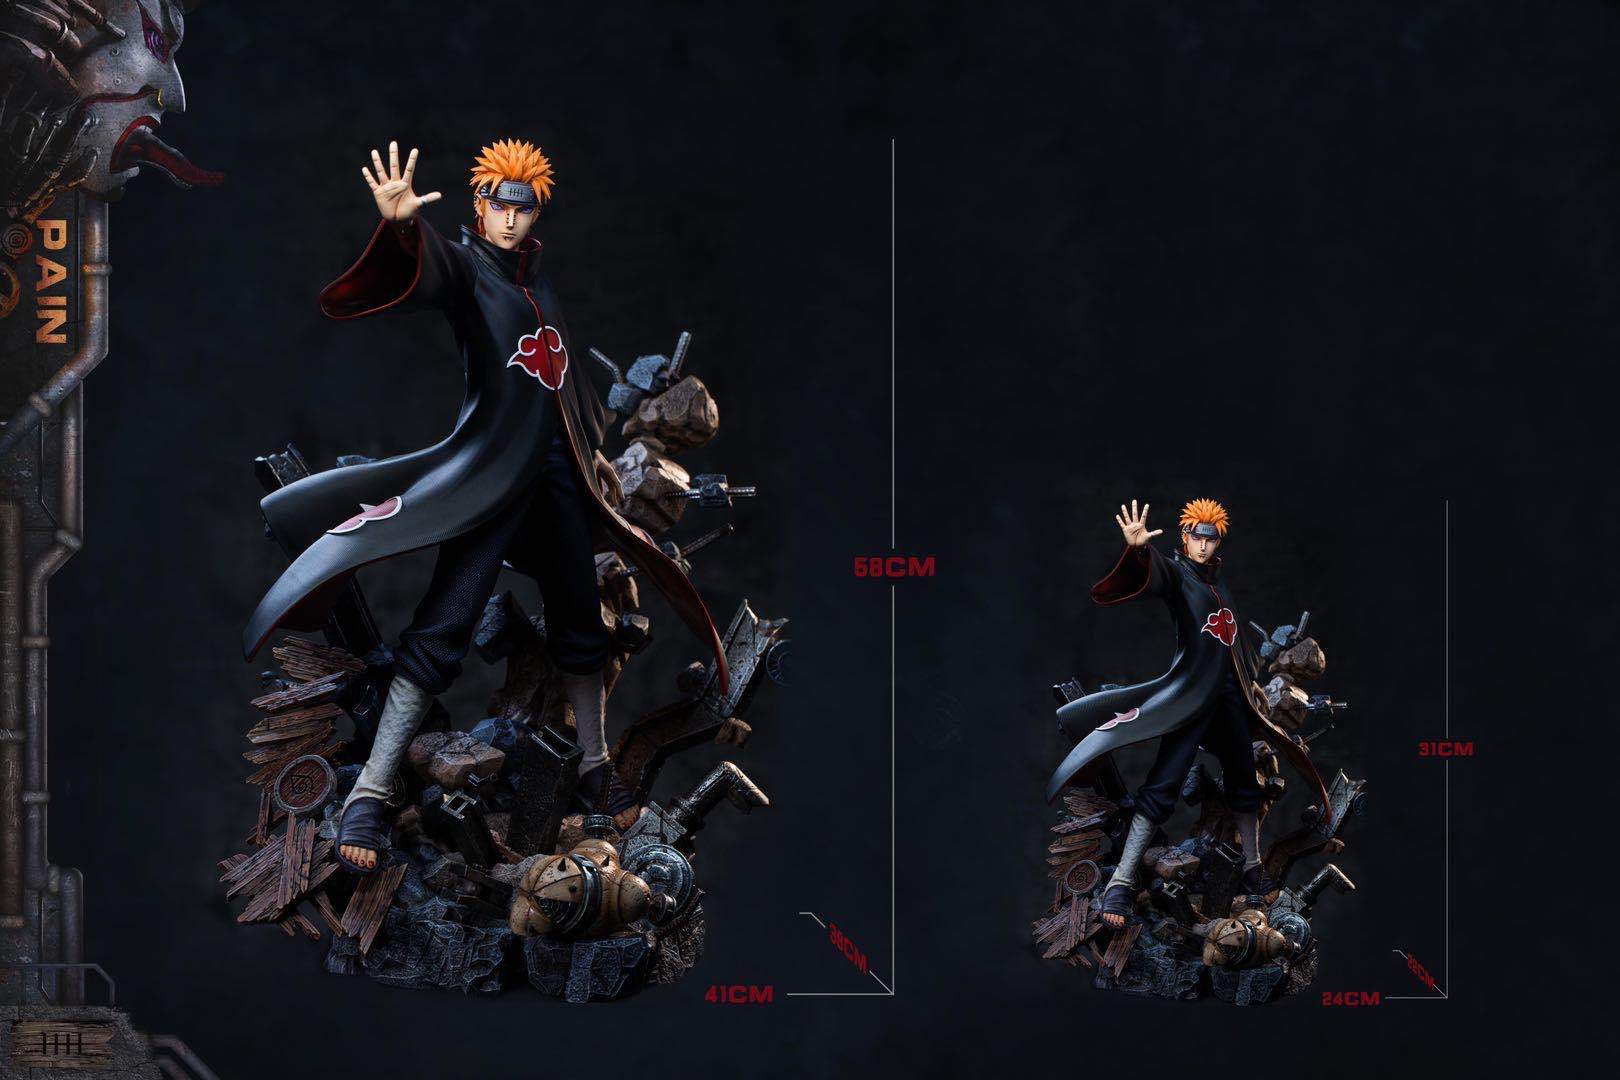 Pain Action Figure from Naruto Shippuden - 41cm Tall – Anime Figures